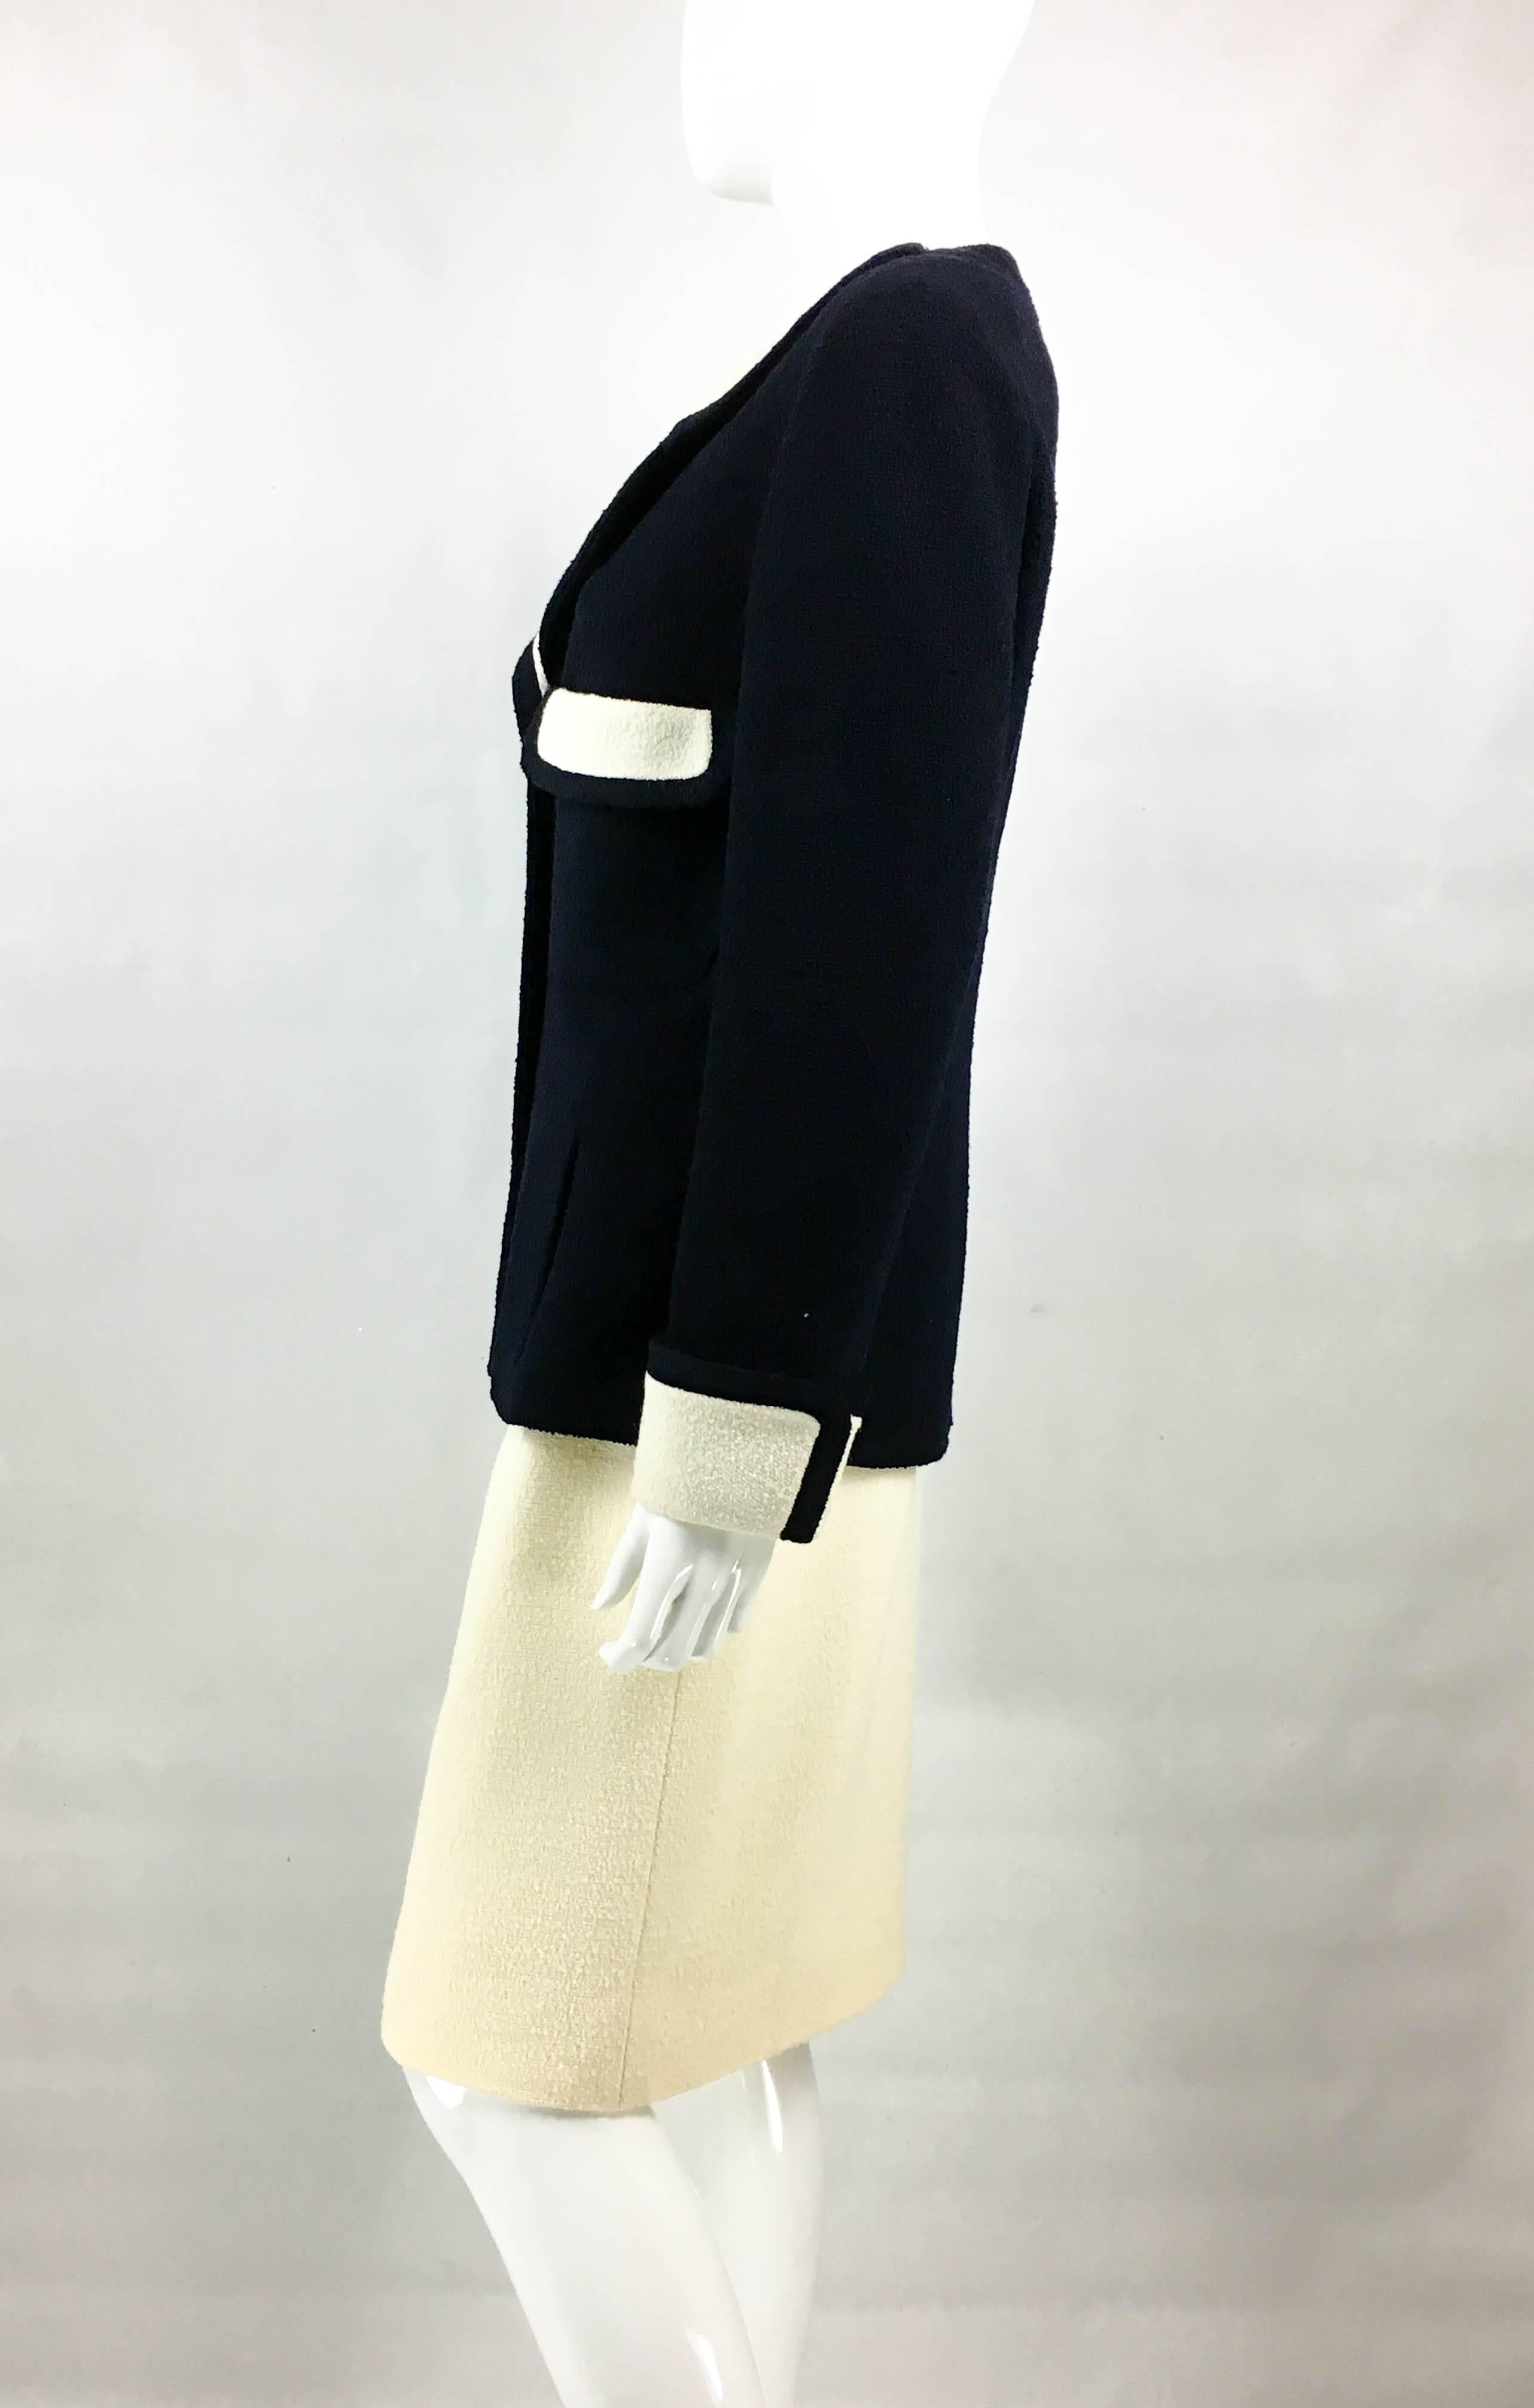 Chanel Nautical Inspired Navy and White Wool Skirt Suit, Circa 1982 3